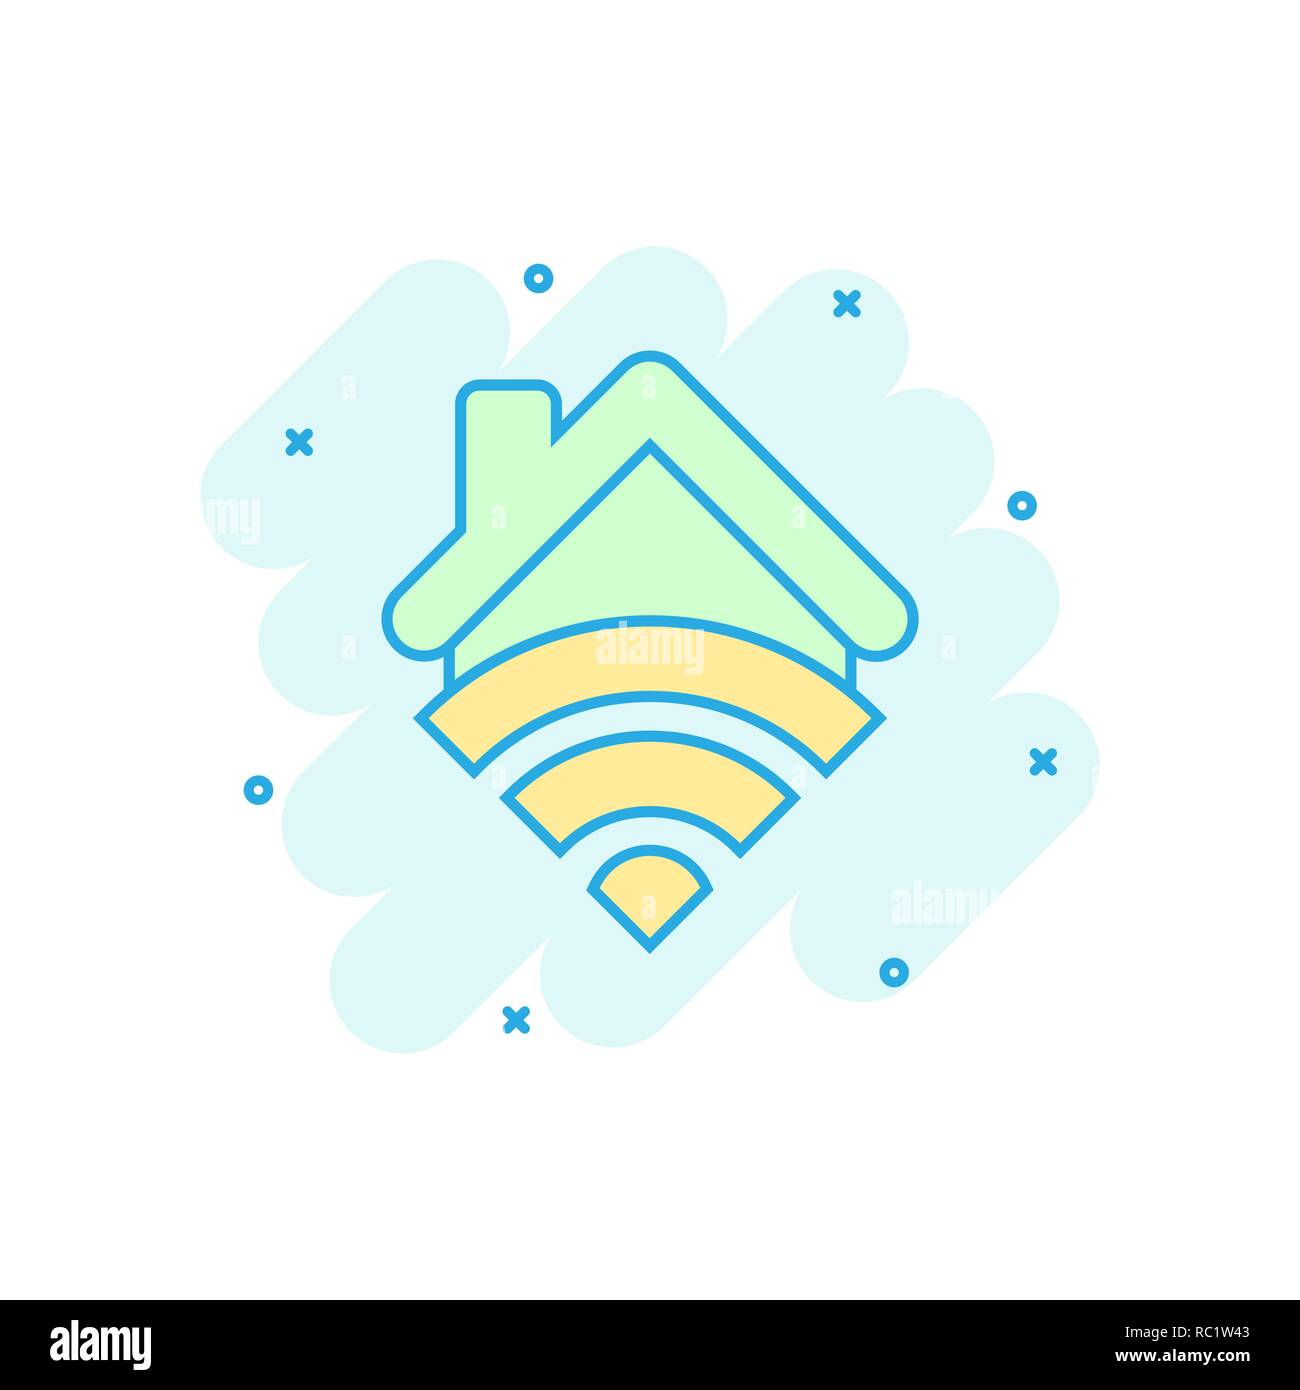 Smart home icon in comic style. House control vector cartoon illustration pictogram. Smart home business concept splash effect. Stock Vector